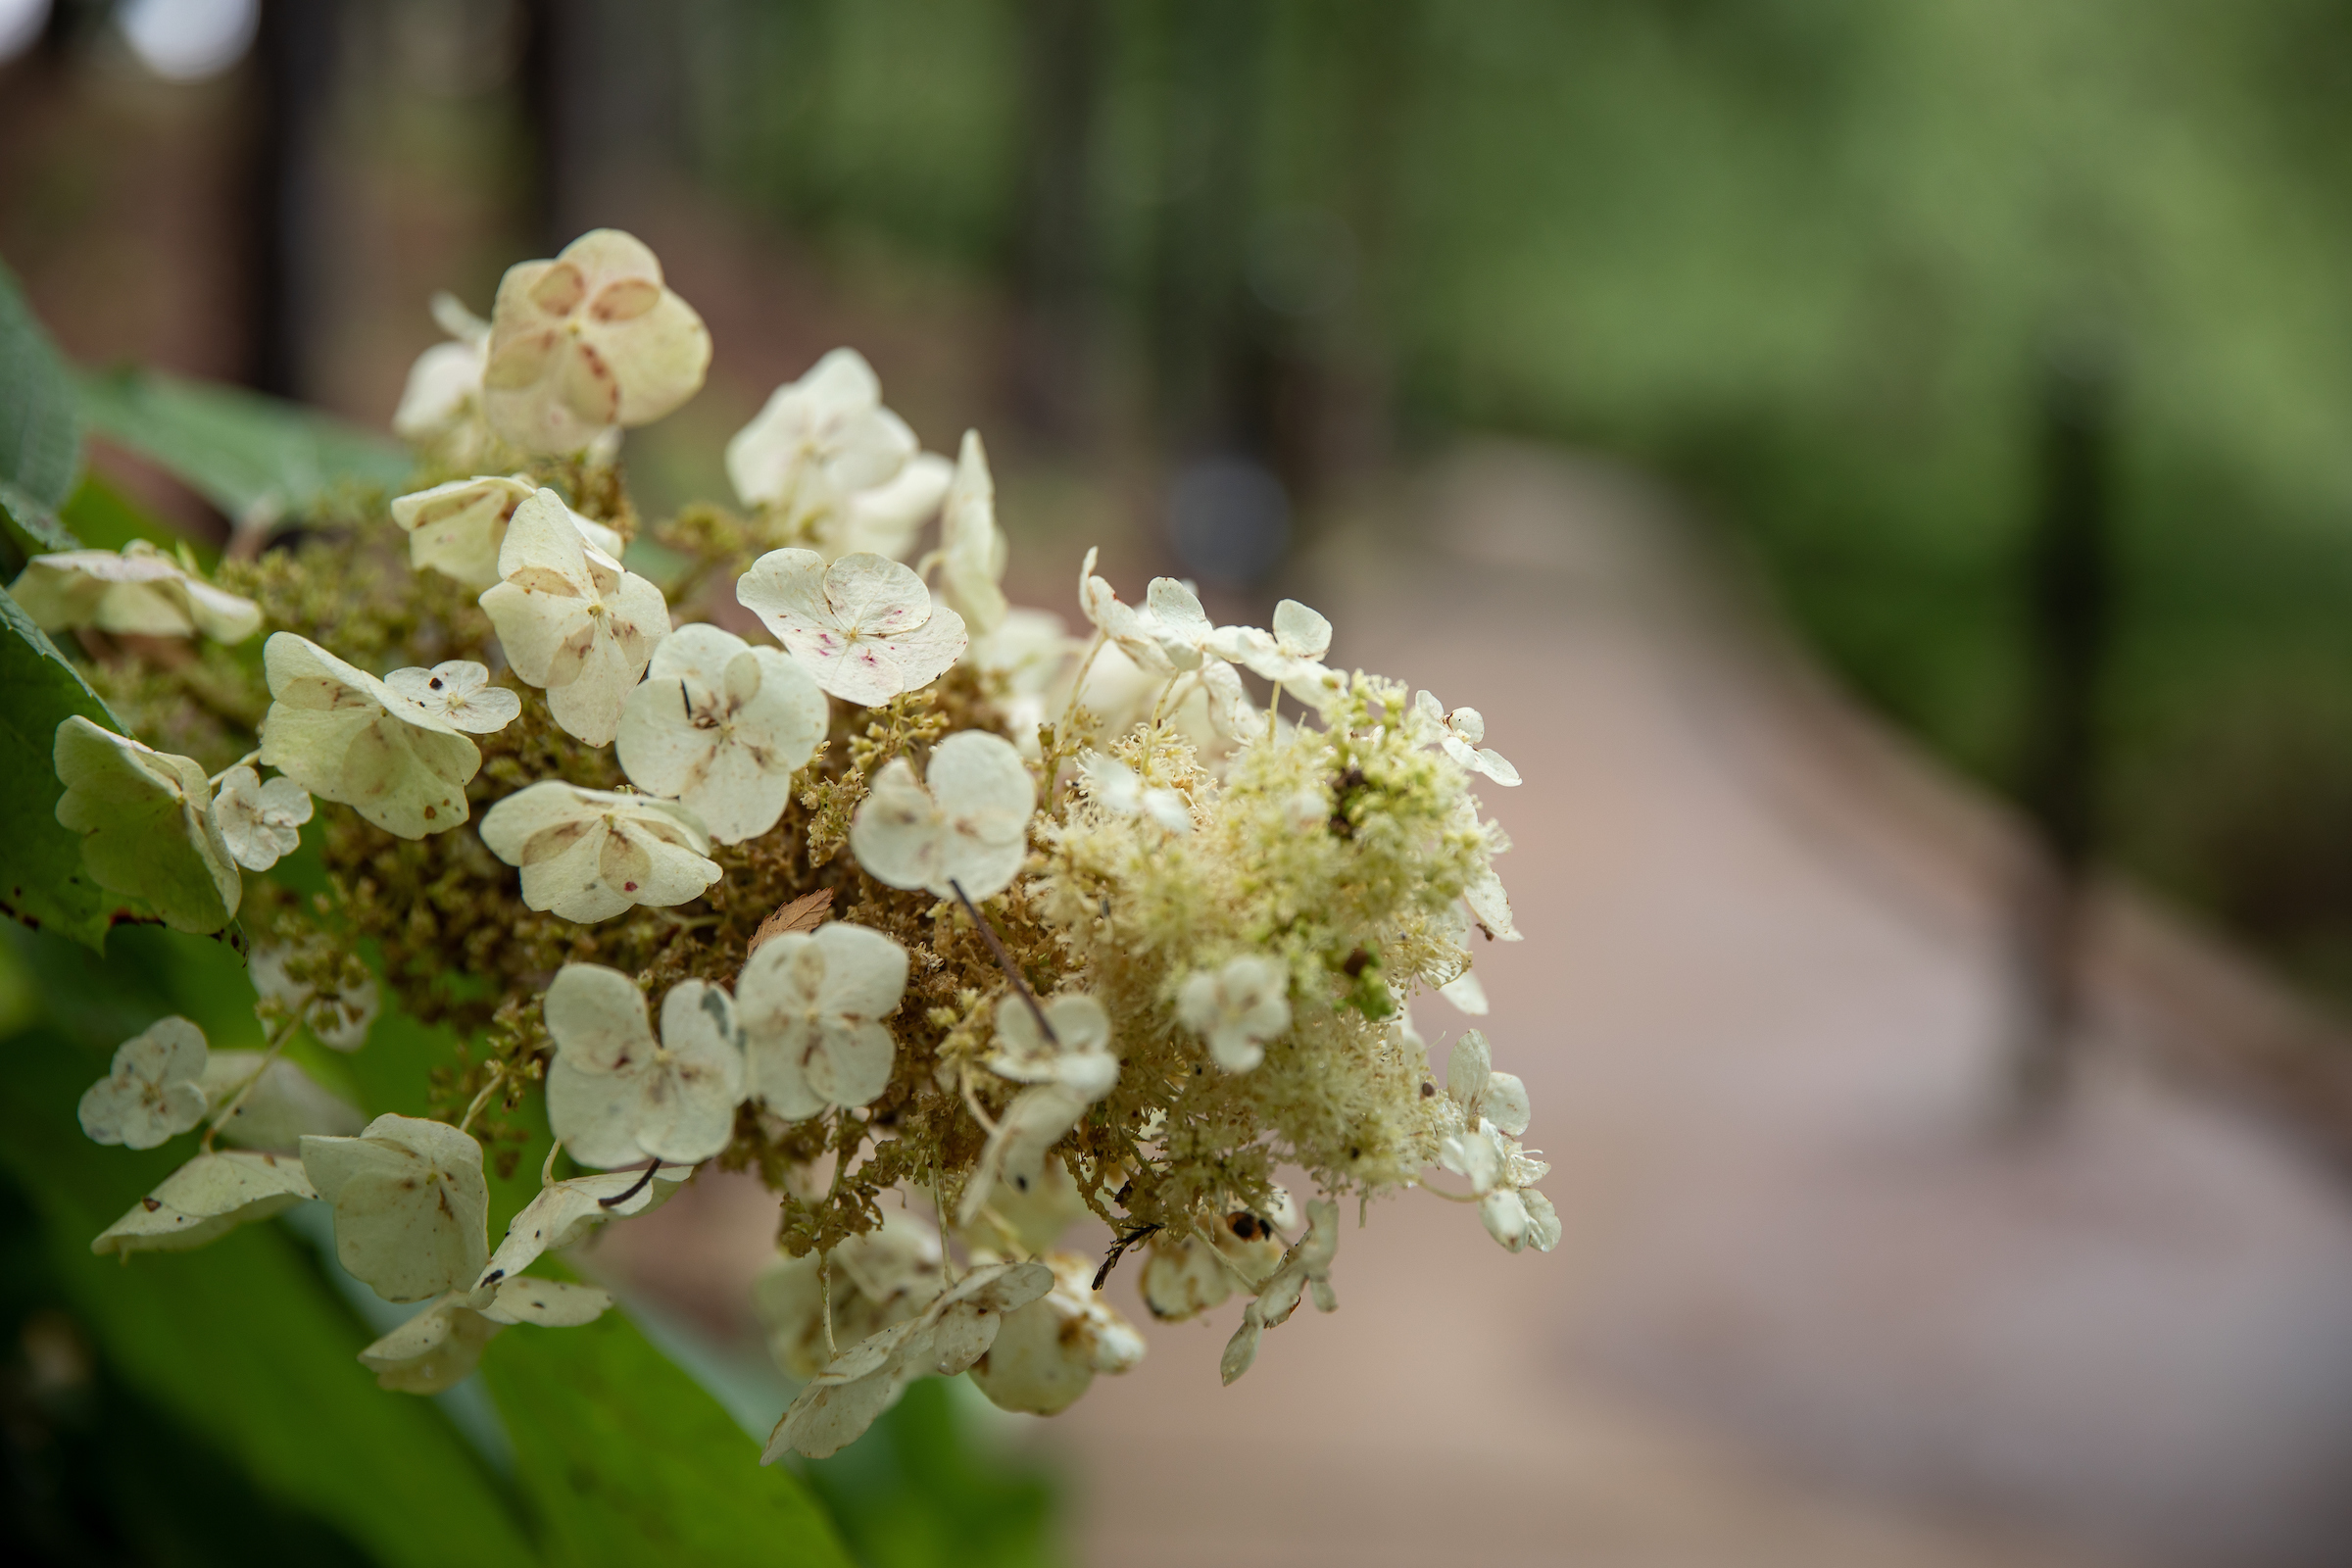 A blooming hydrangea